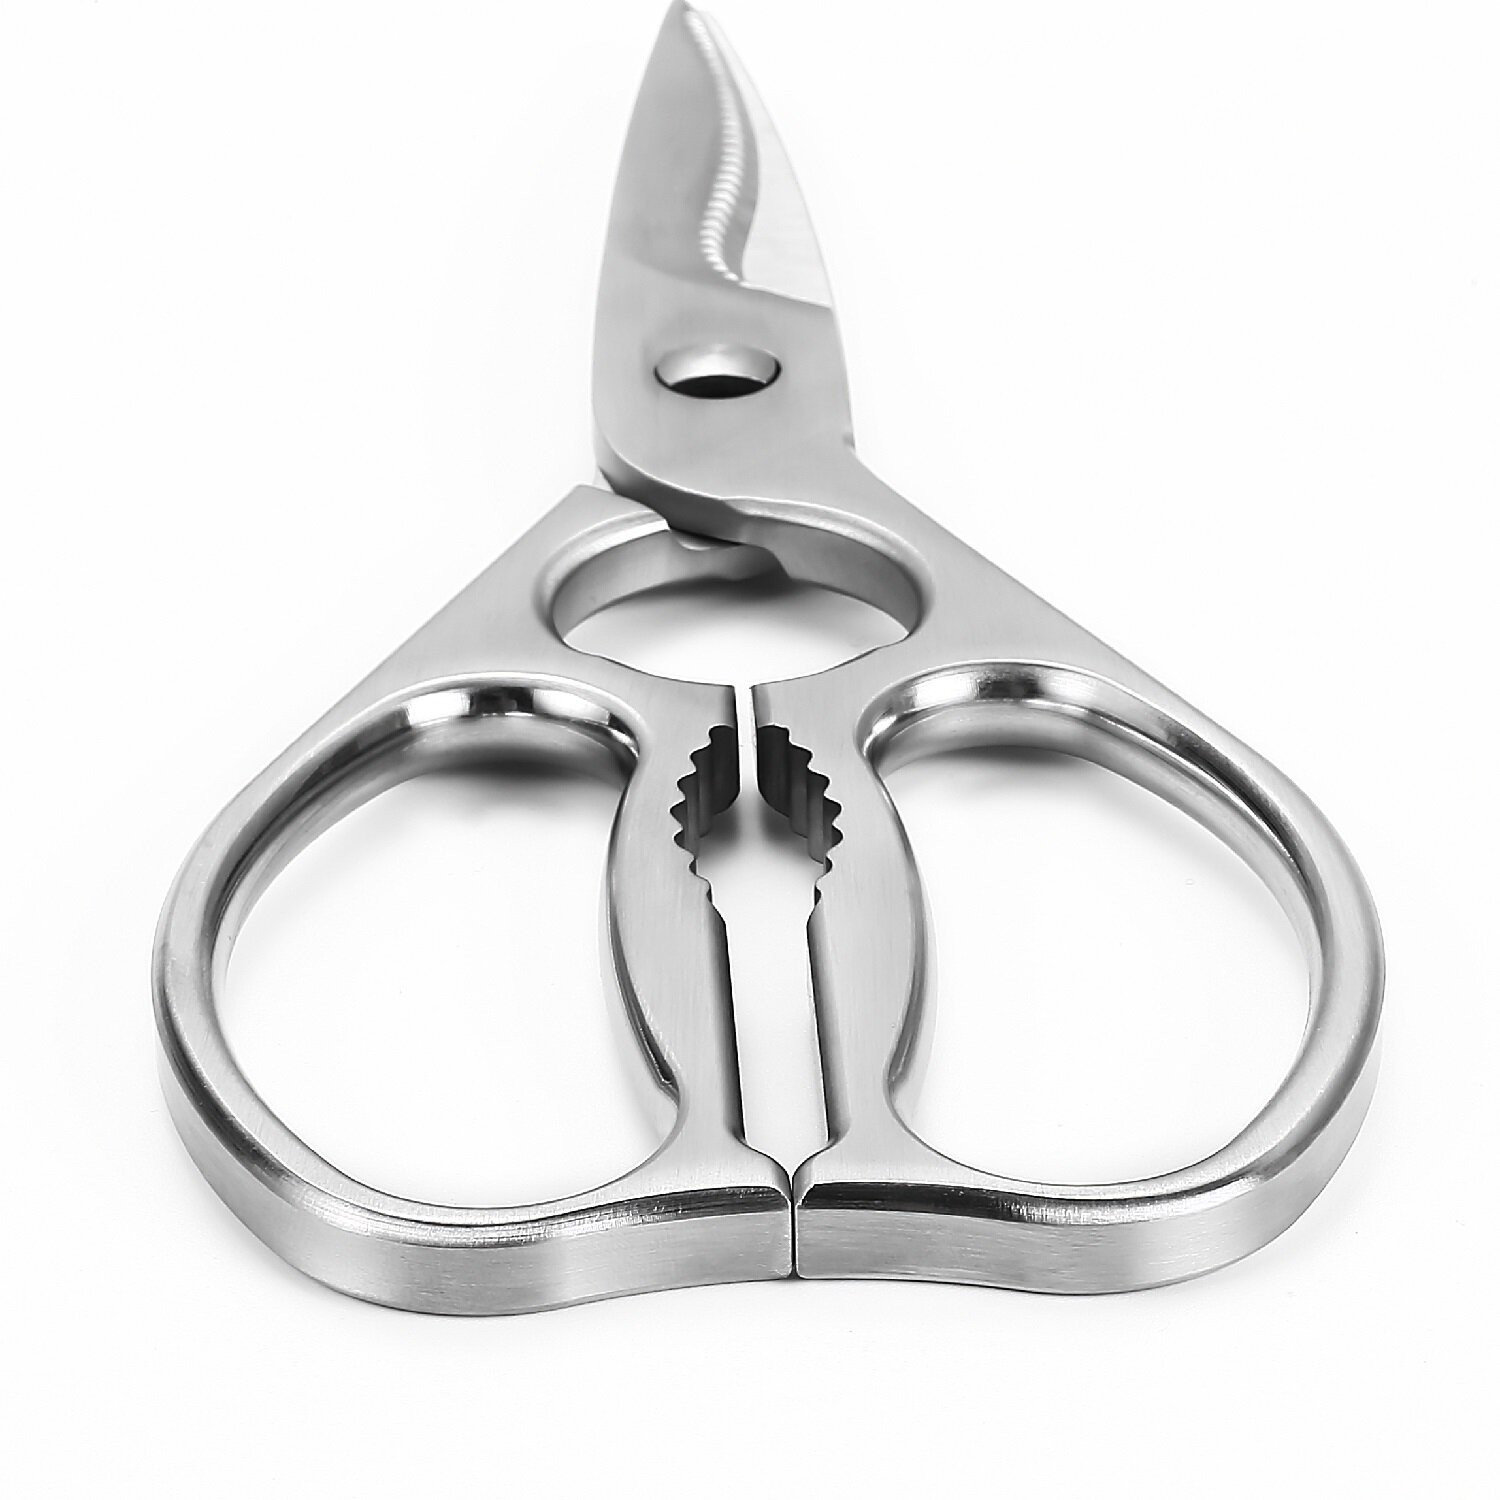 Multipurpose Stainless Steel Meat Cutting Scissors With Magnetic Holder